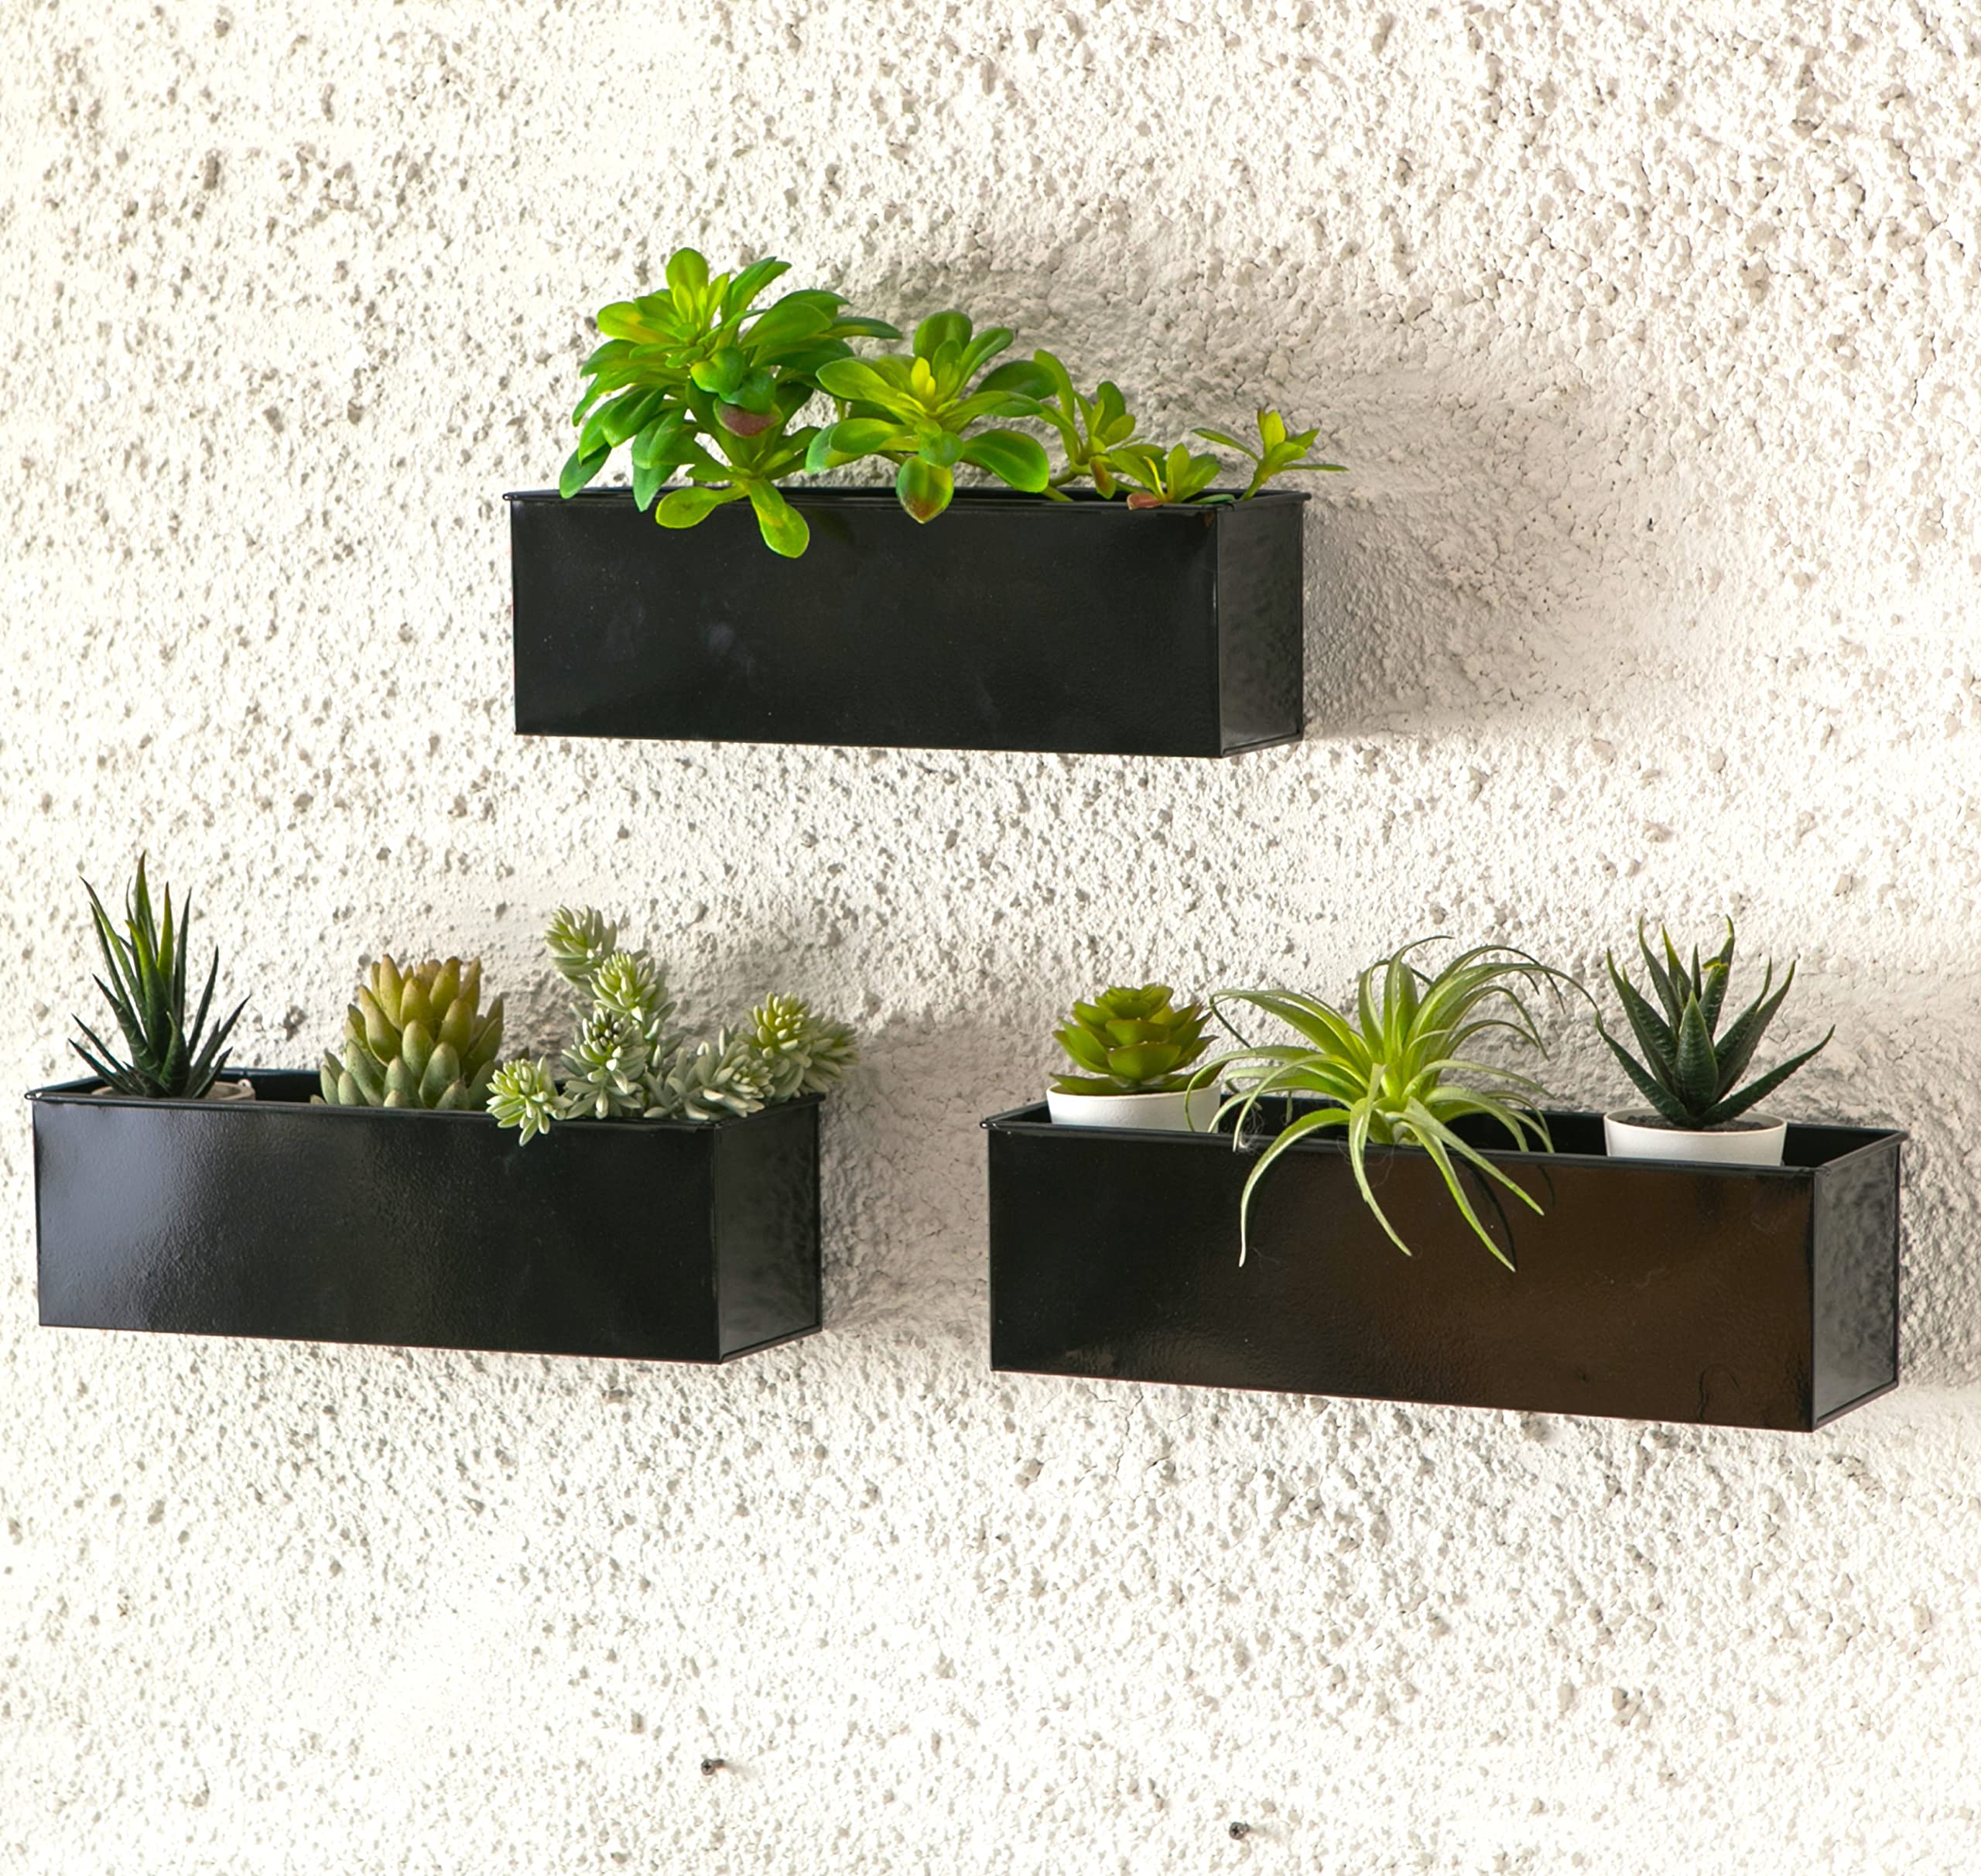 LaLaGreen Wall Planter (3 Pack, 12 Inch) Large Wall Mount Succulent Planters Black, Wall Hanging Rectangular Metal Flower Pot Window Planter Box Fence Railing Minimalist Floating Shelve Indoor Outdoor